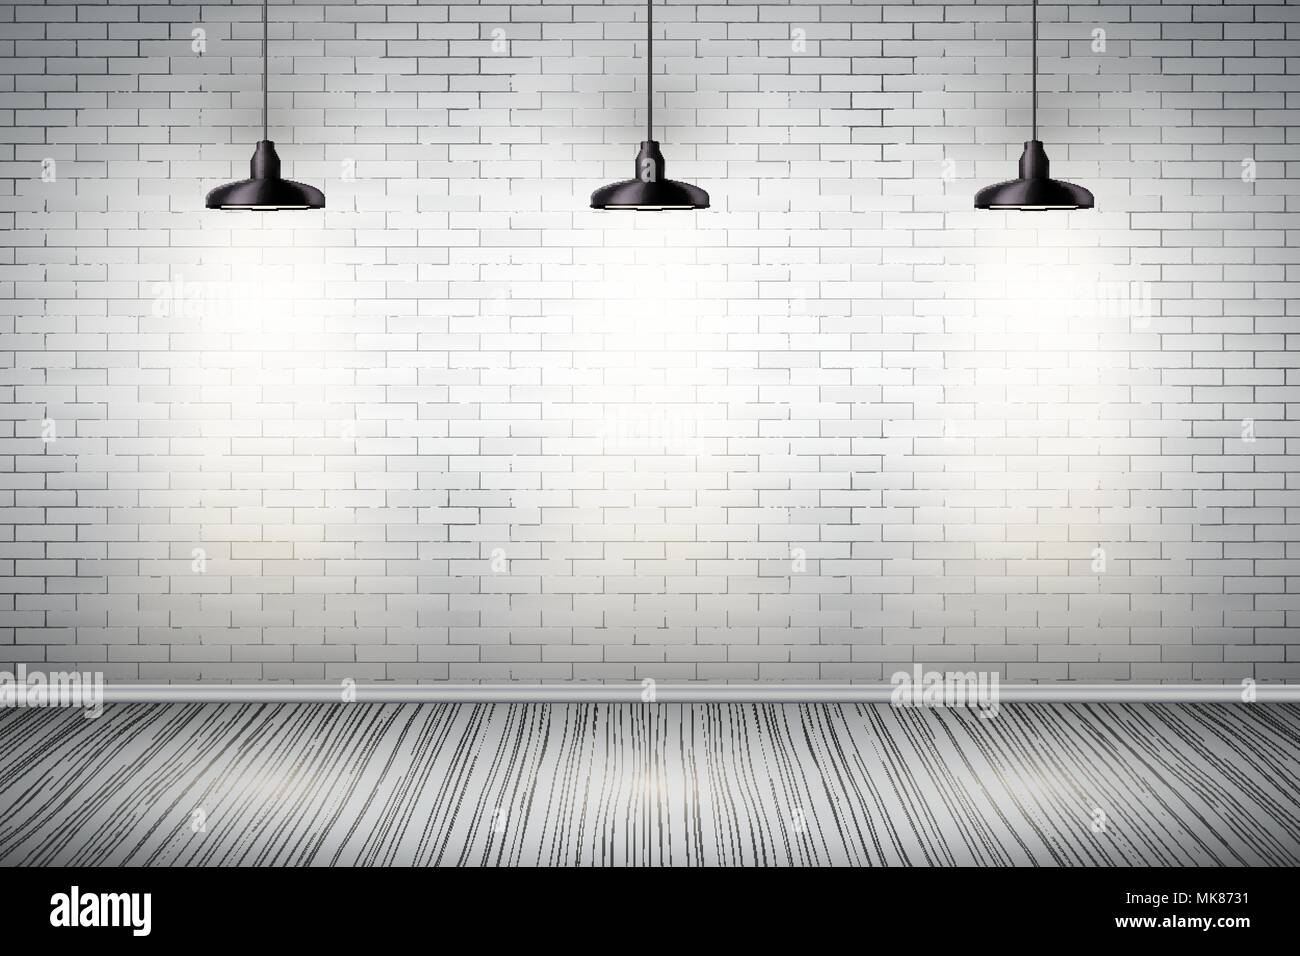 Interior of White brick wall with vintage pedant lamps and wooden floor. Vintage Rural room and fashion interior. Grunge Industrial Texture. Backgroun Stock Vector